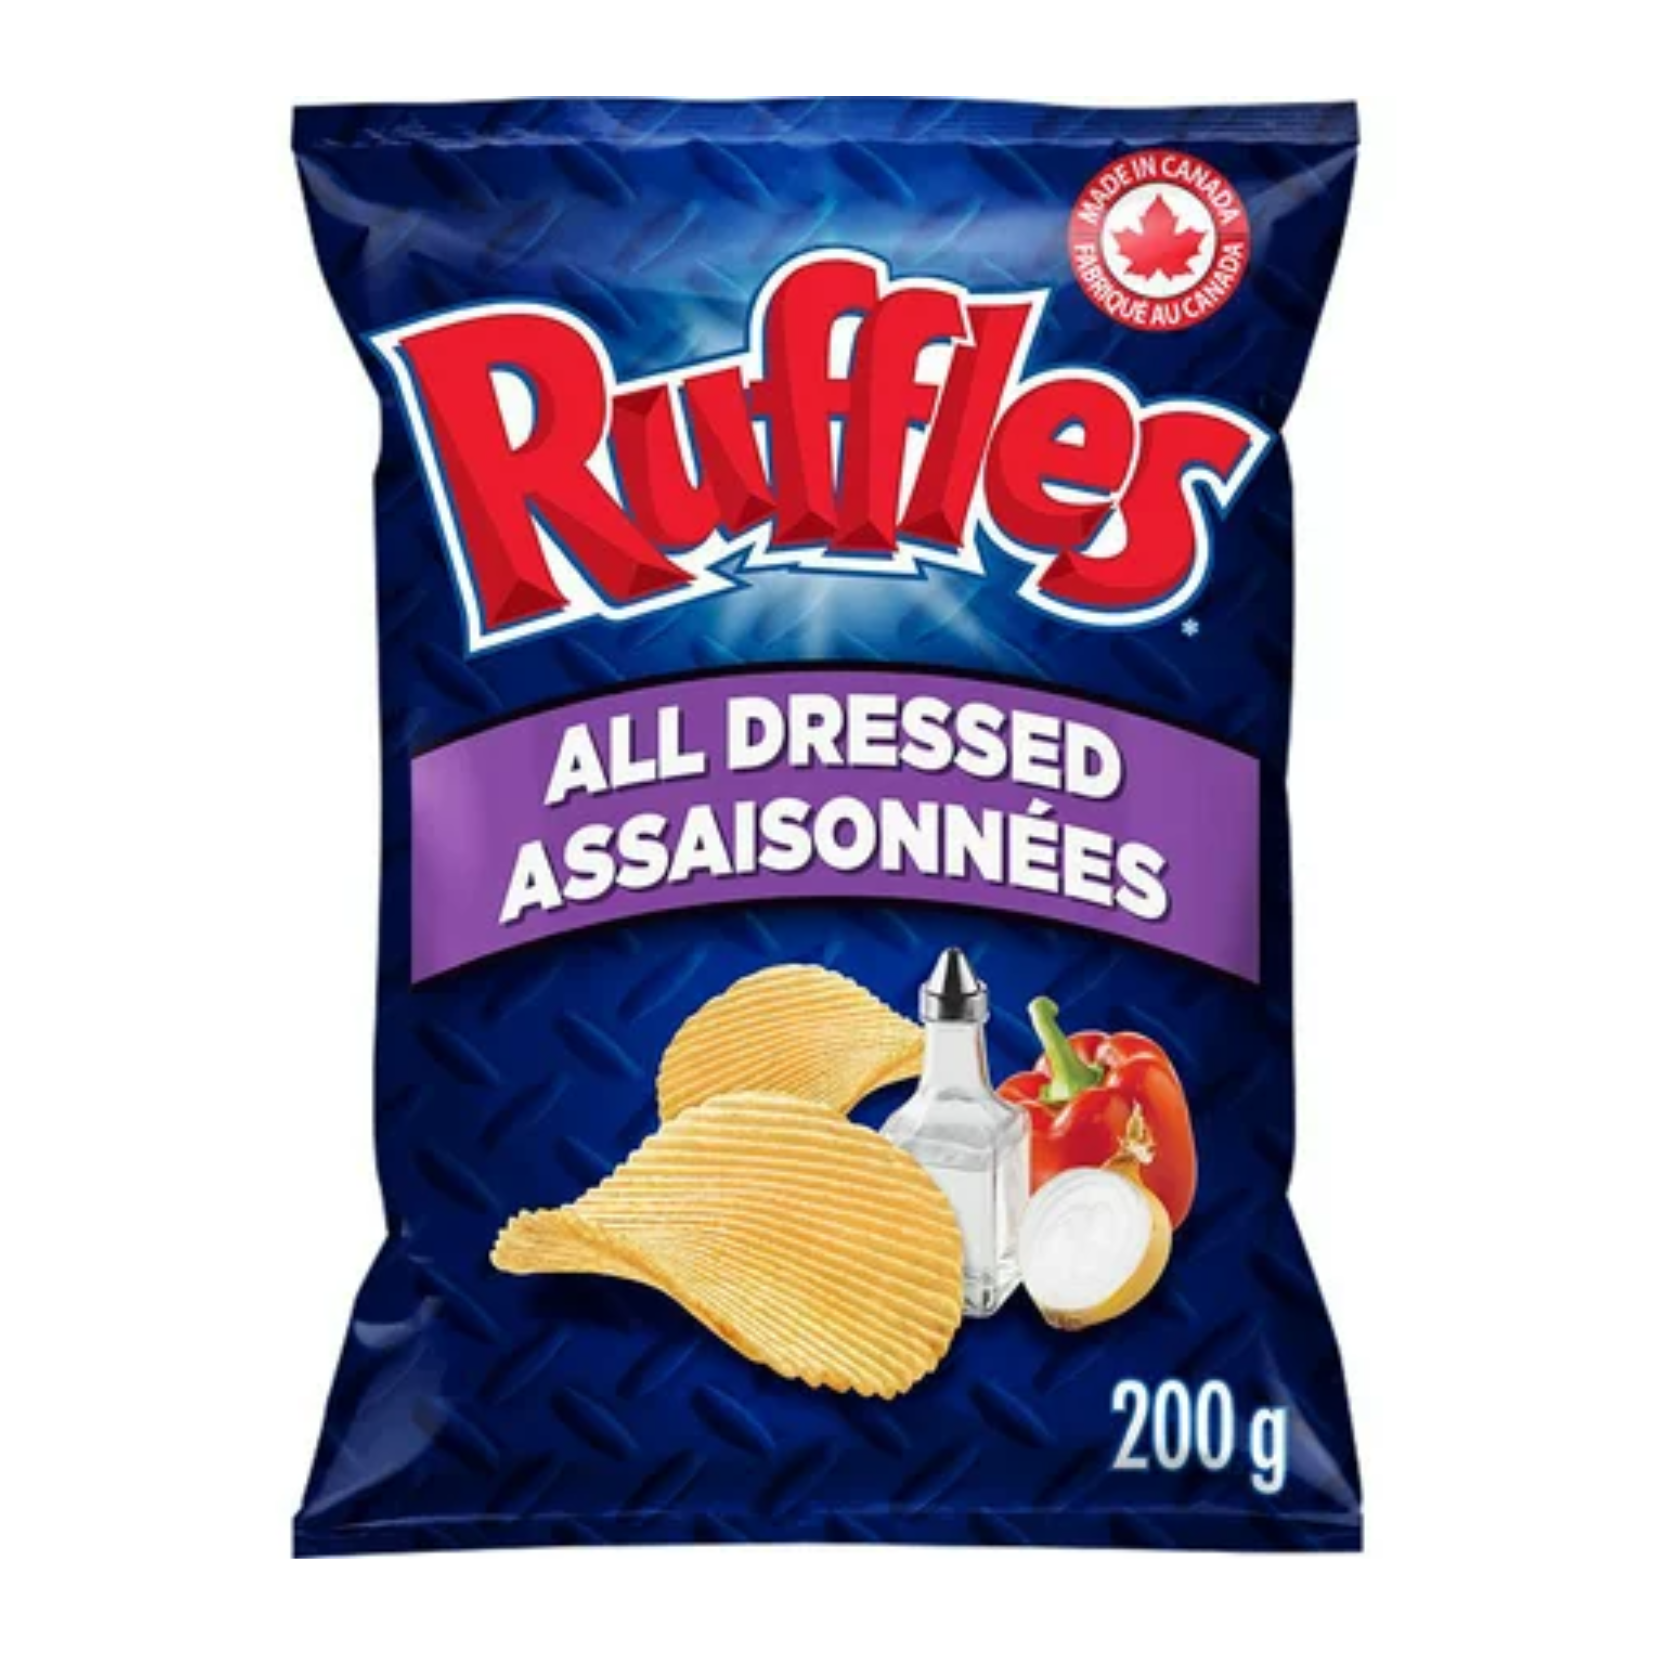 Ruffles All Dressed Chips 200g